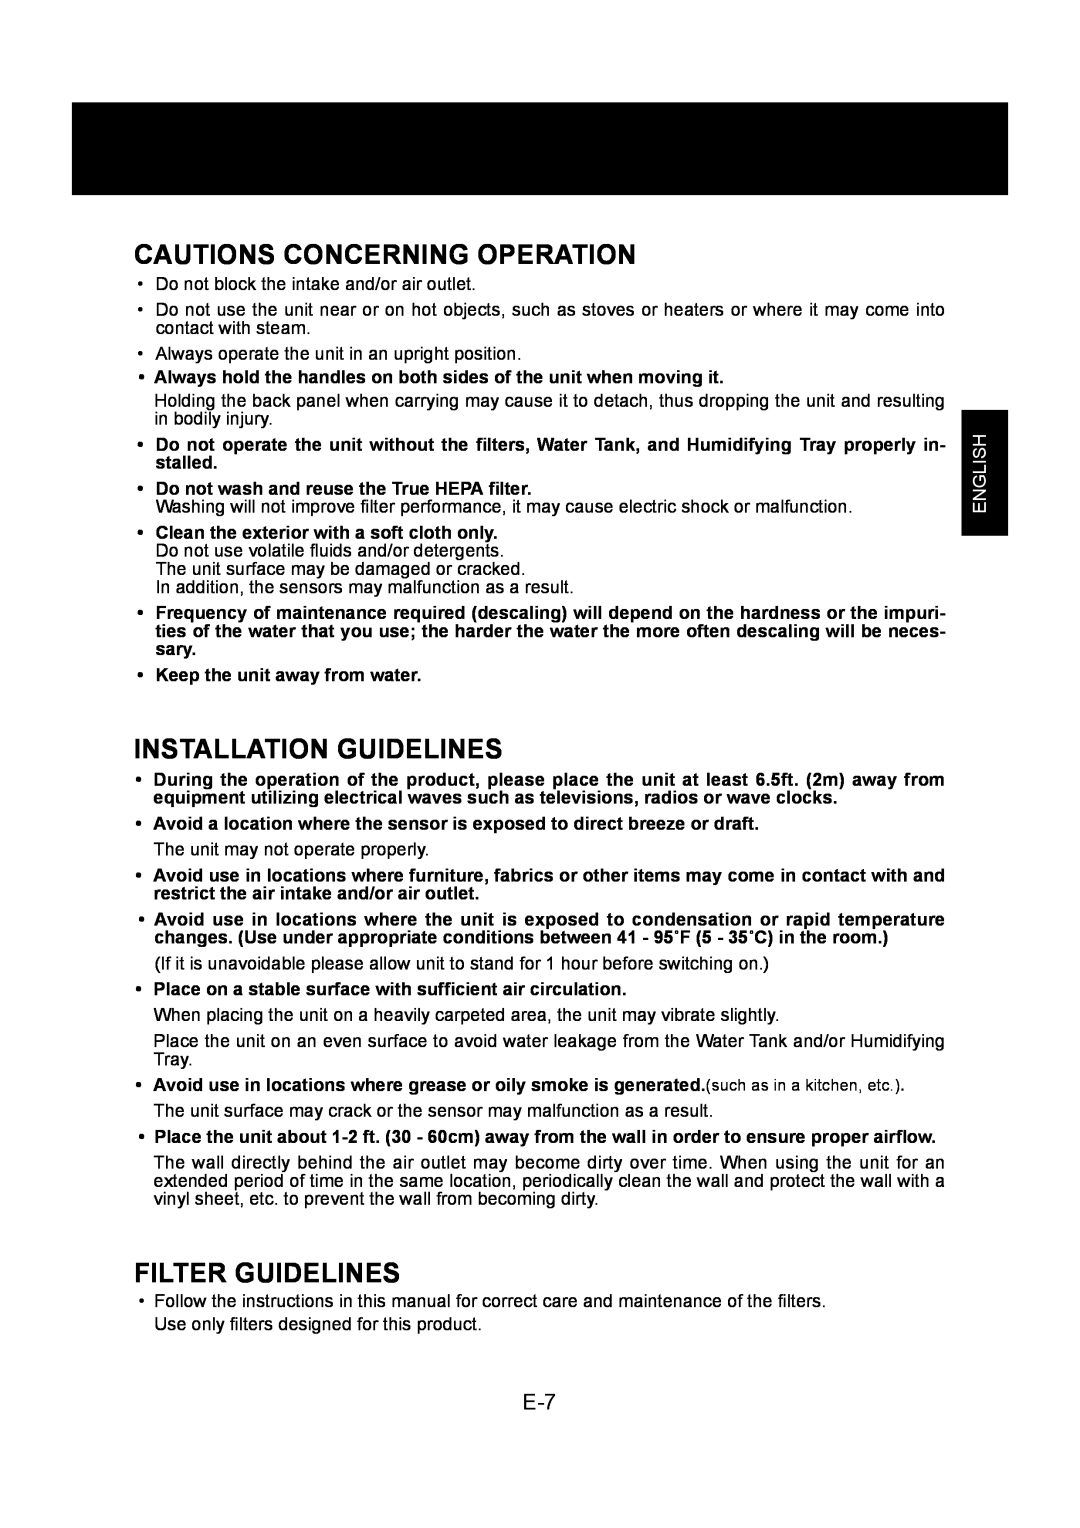 Sharp KC-860U operation manual Cautions Concerning Operation, Installation Guidelines, Filter Guidelines, English 